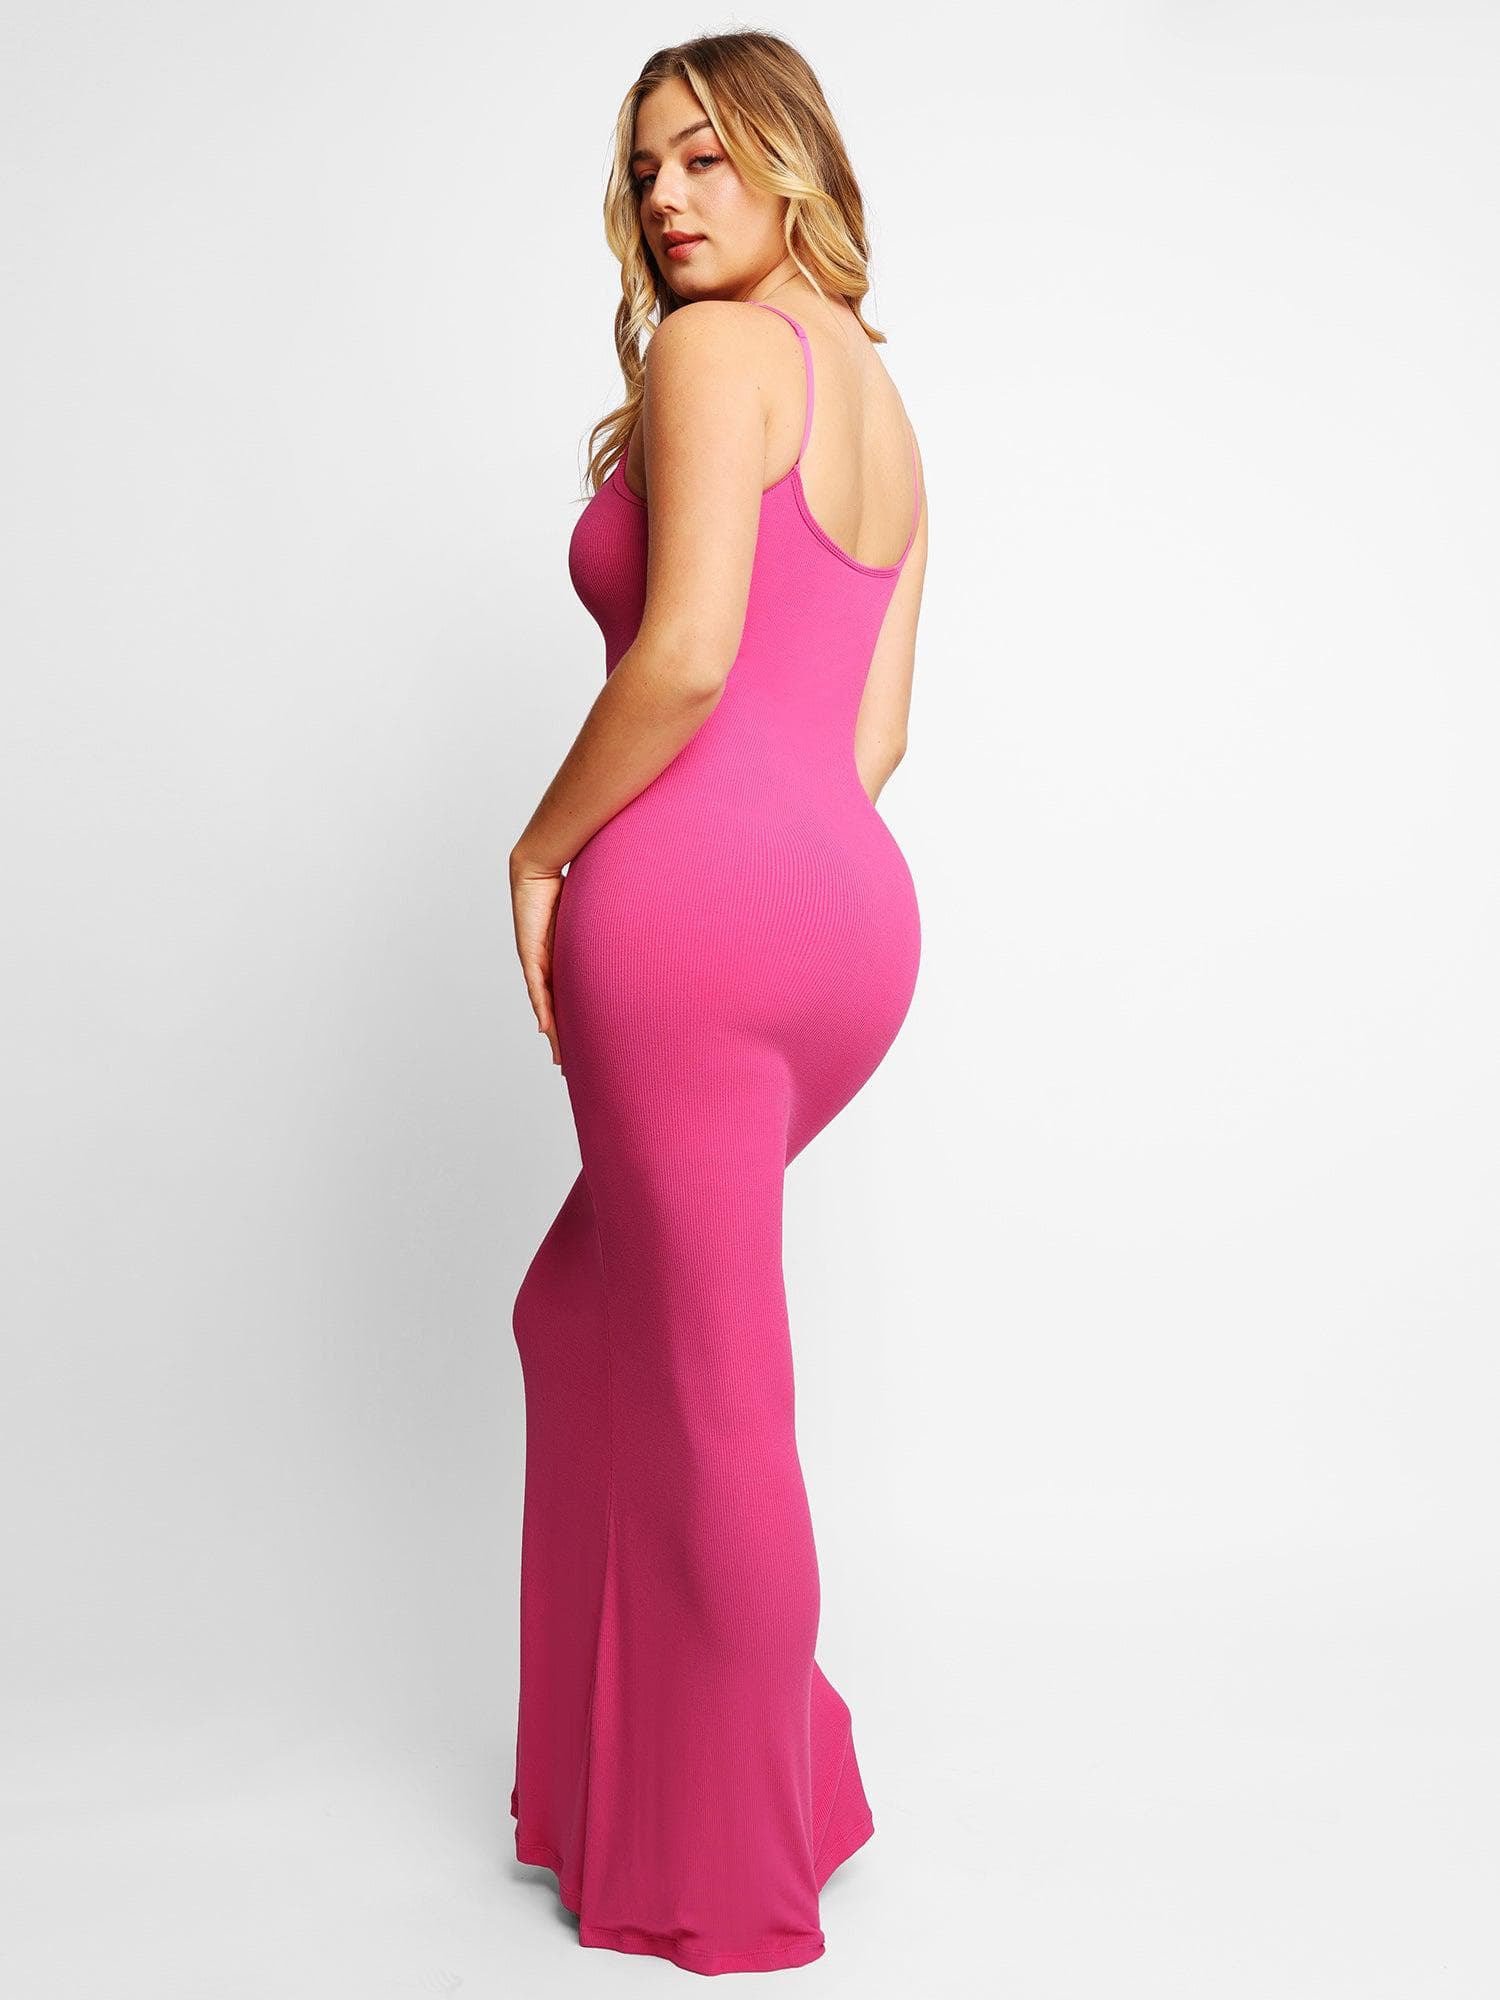 [Last Day Promotion 49% OFF] Built-In Shapewear Long Sleeve Maxi Contour Dress